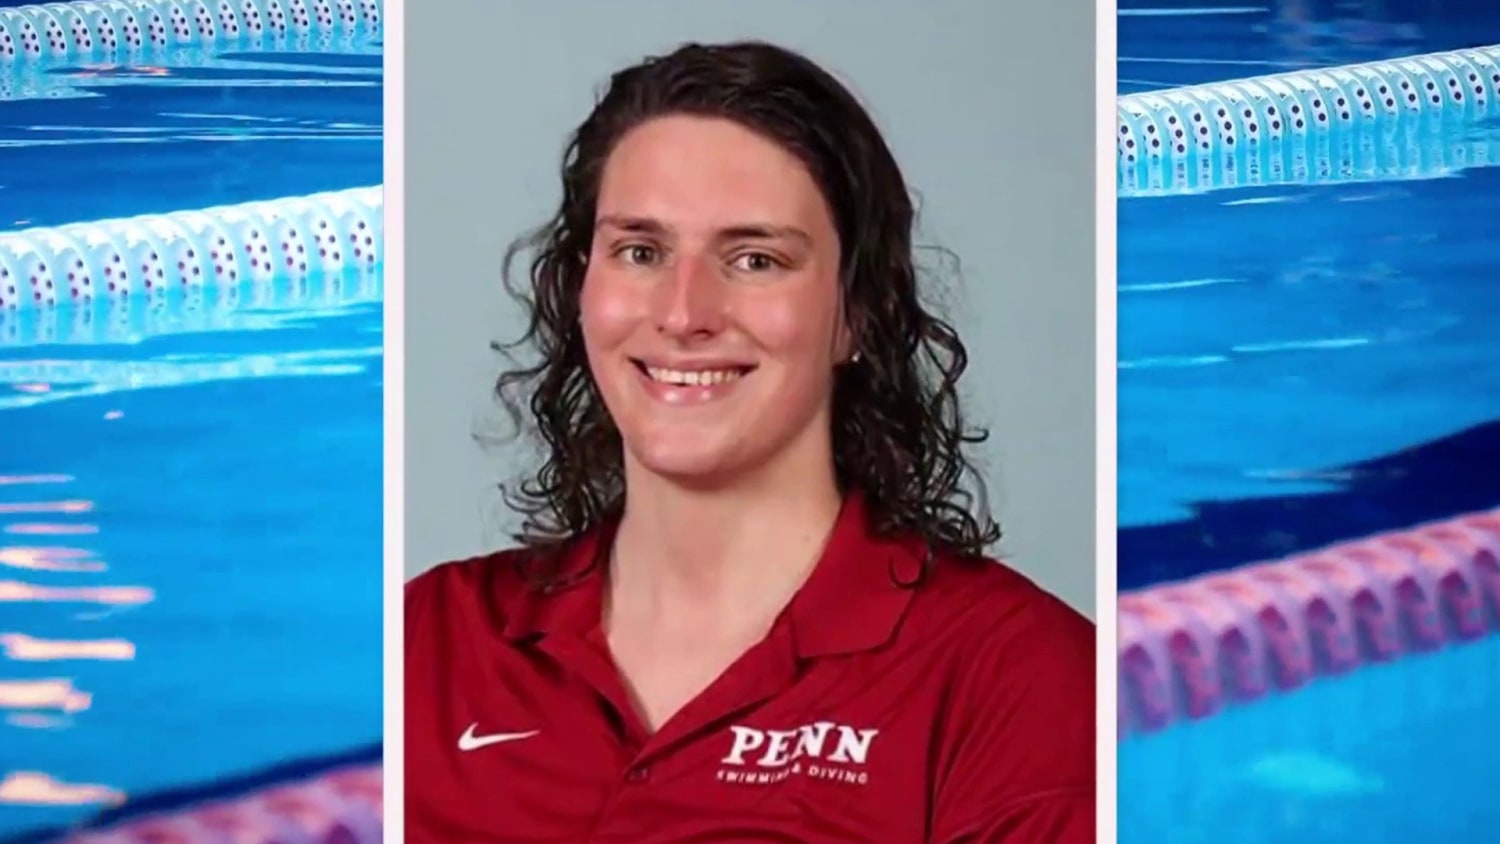 Former NCAA swimmer speaks on defending women's sports amidst cultural  confusion